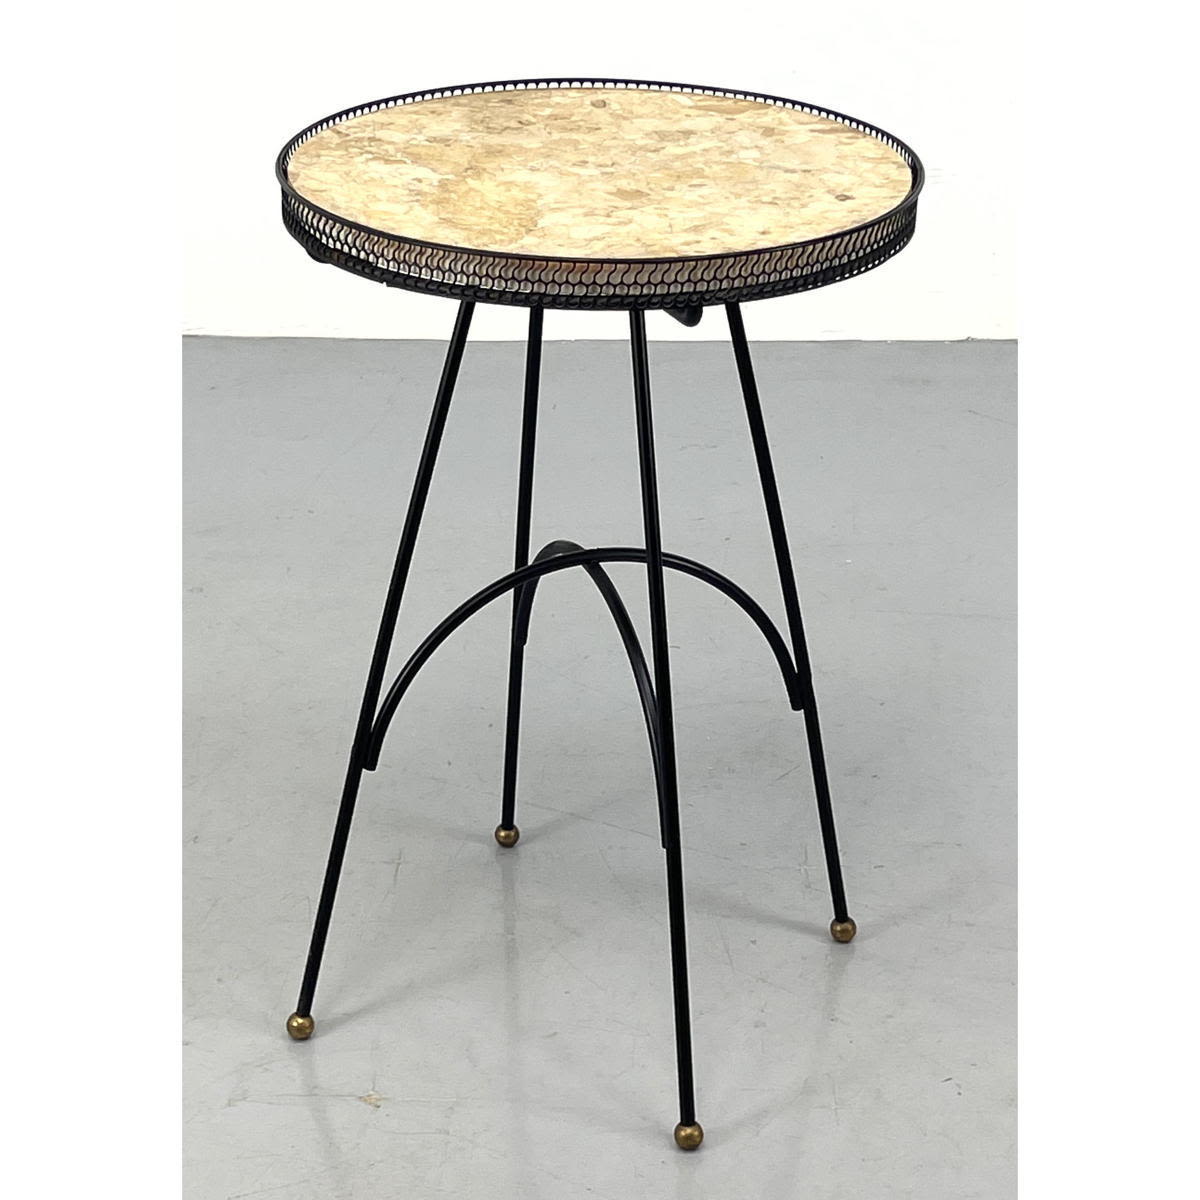 Small Round Marble Top Side Table Stand.